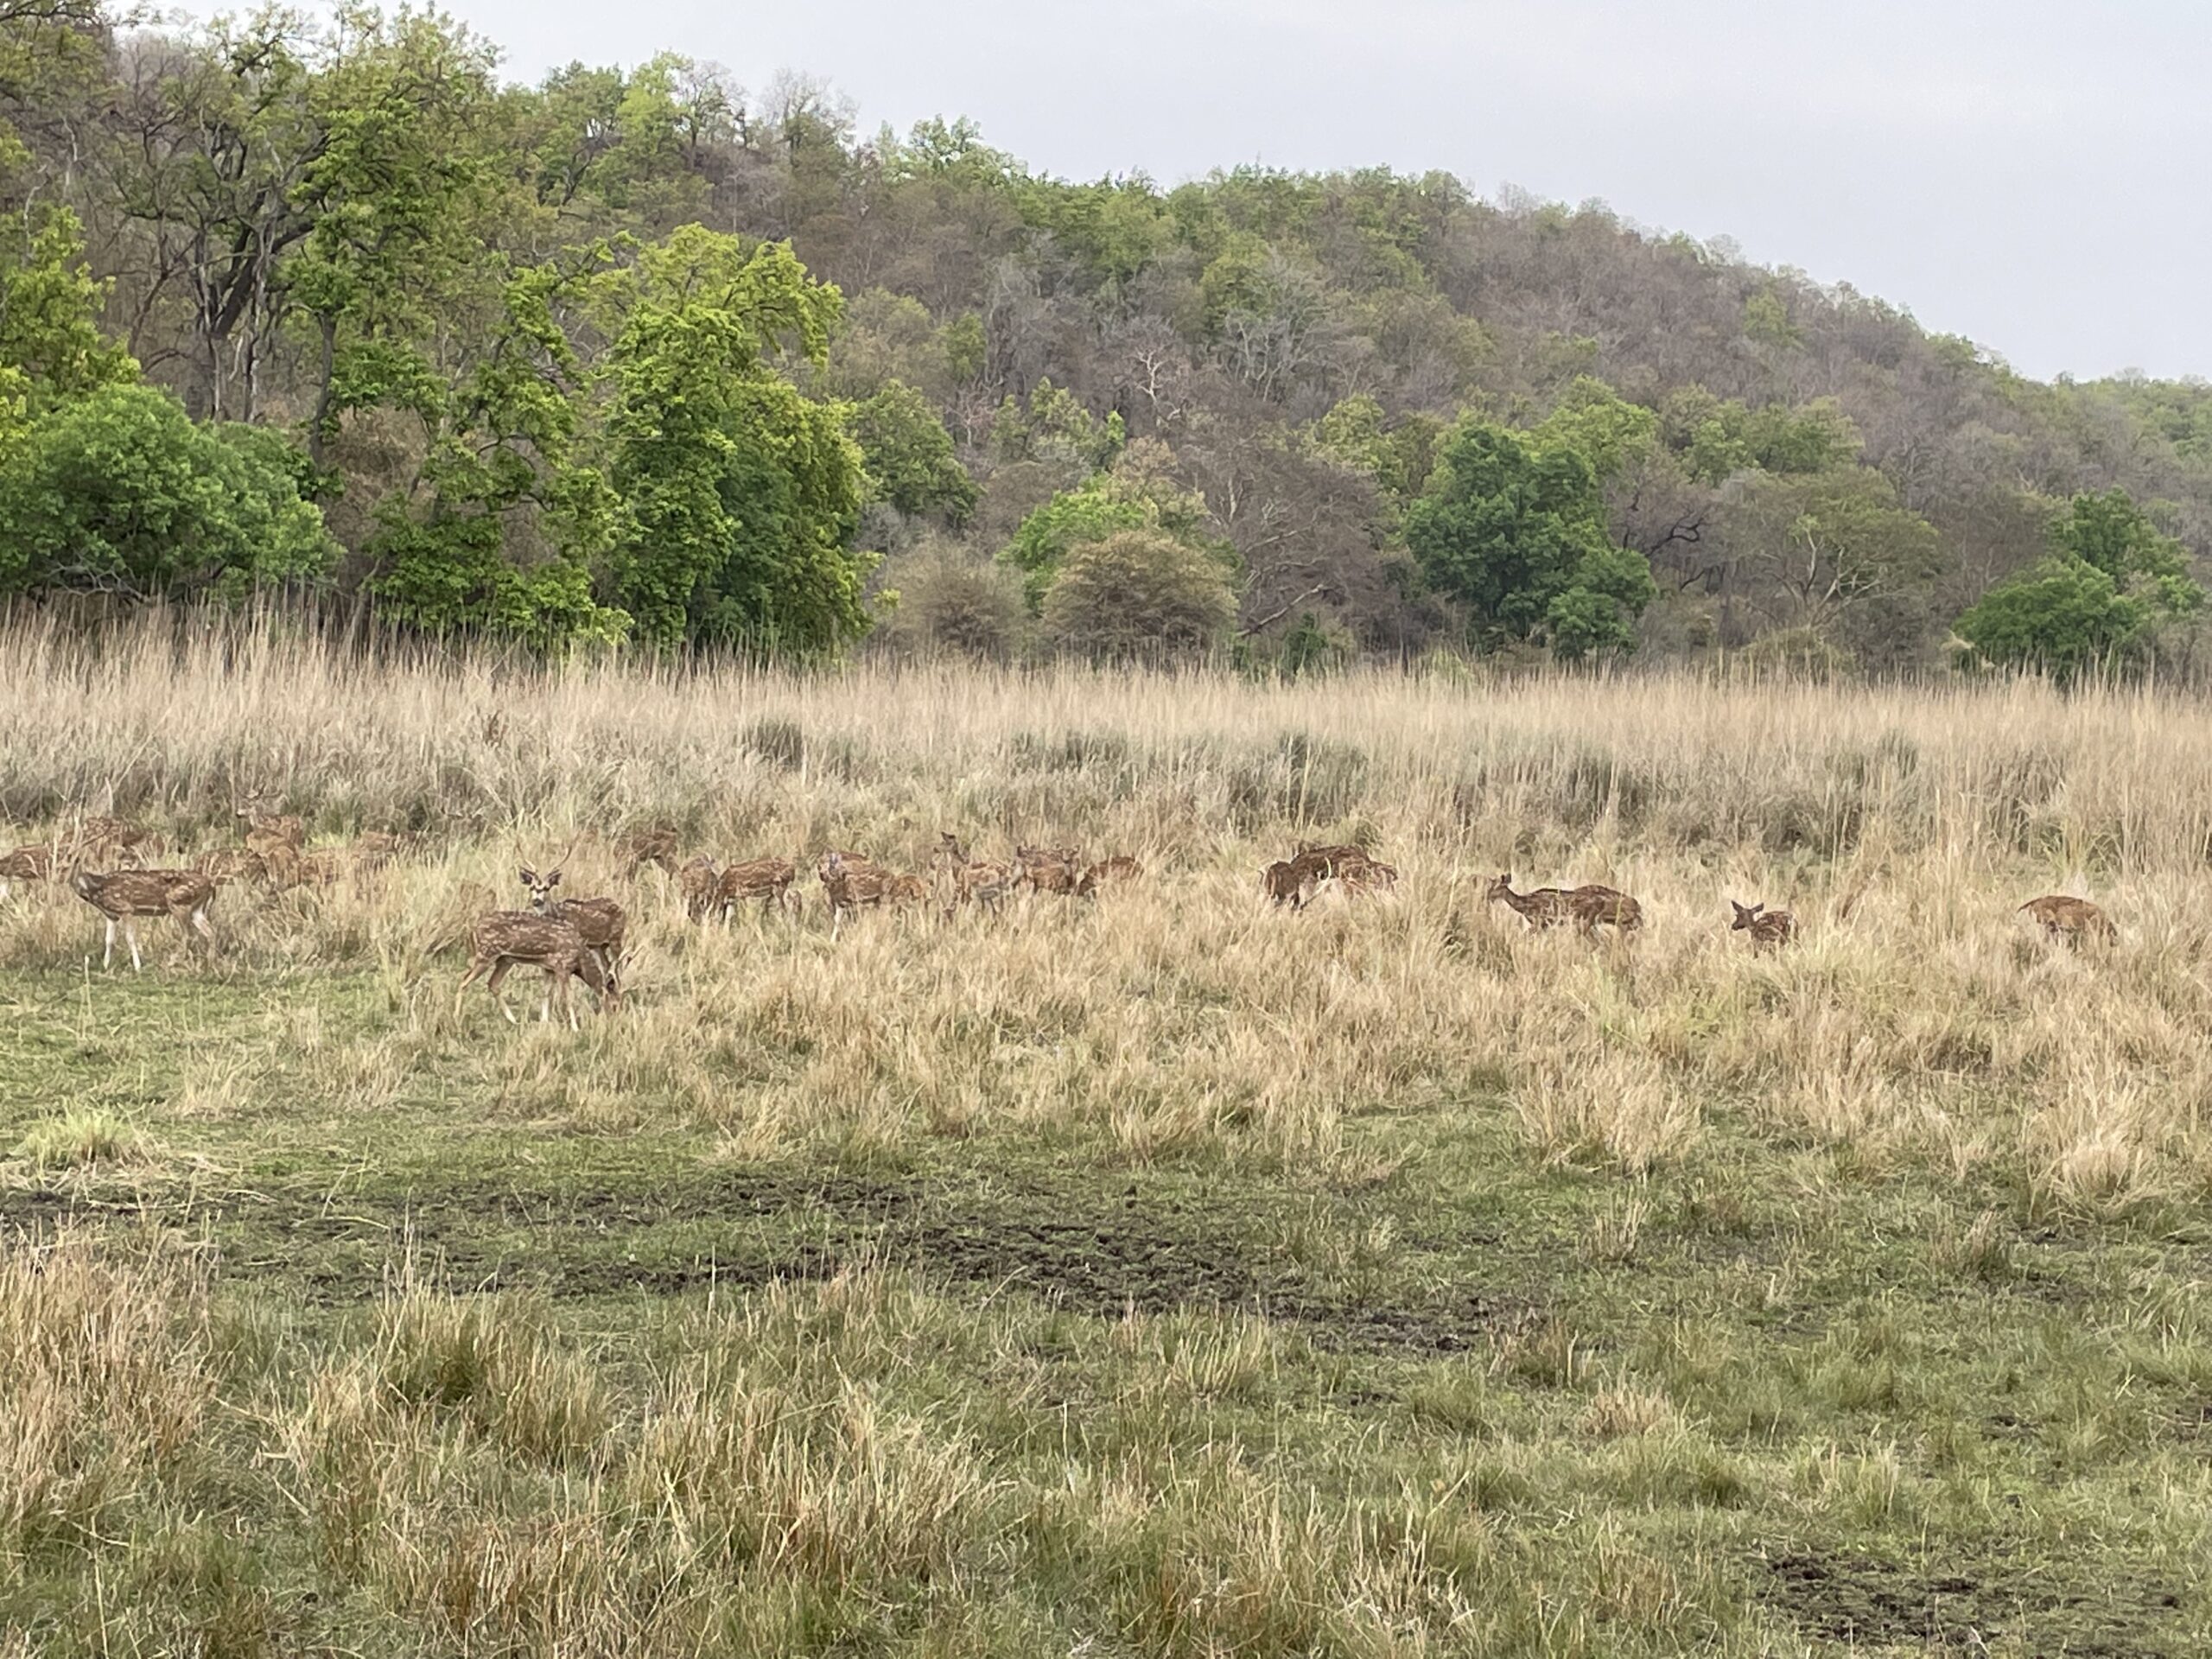 A flock of deer in a clearing at Bandhavgarh National Park.